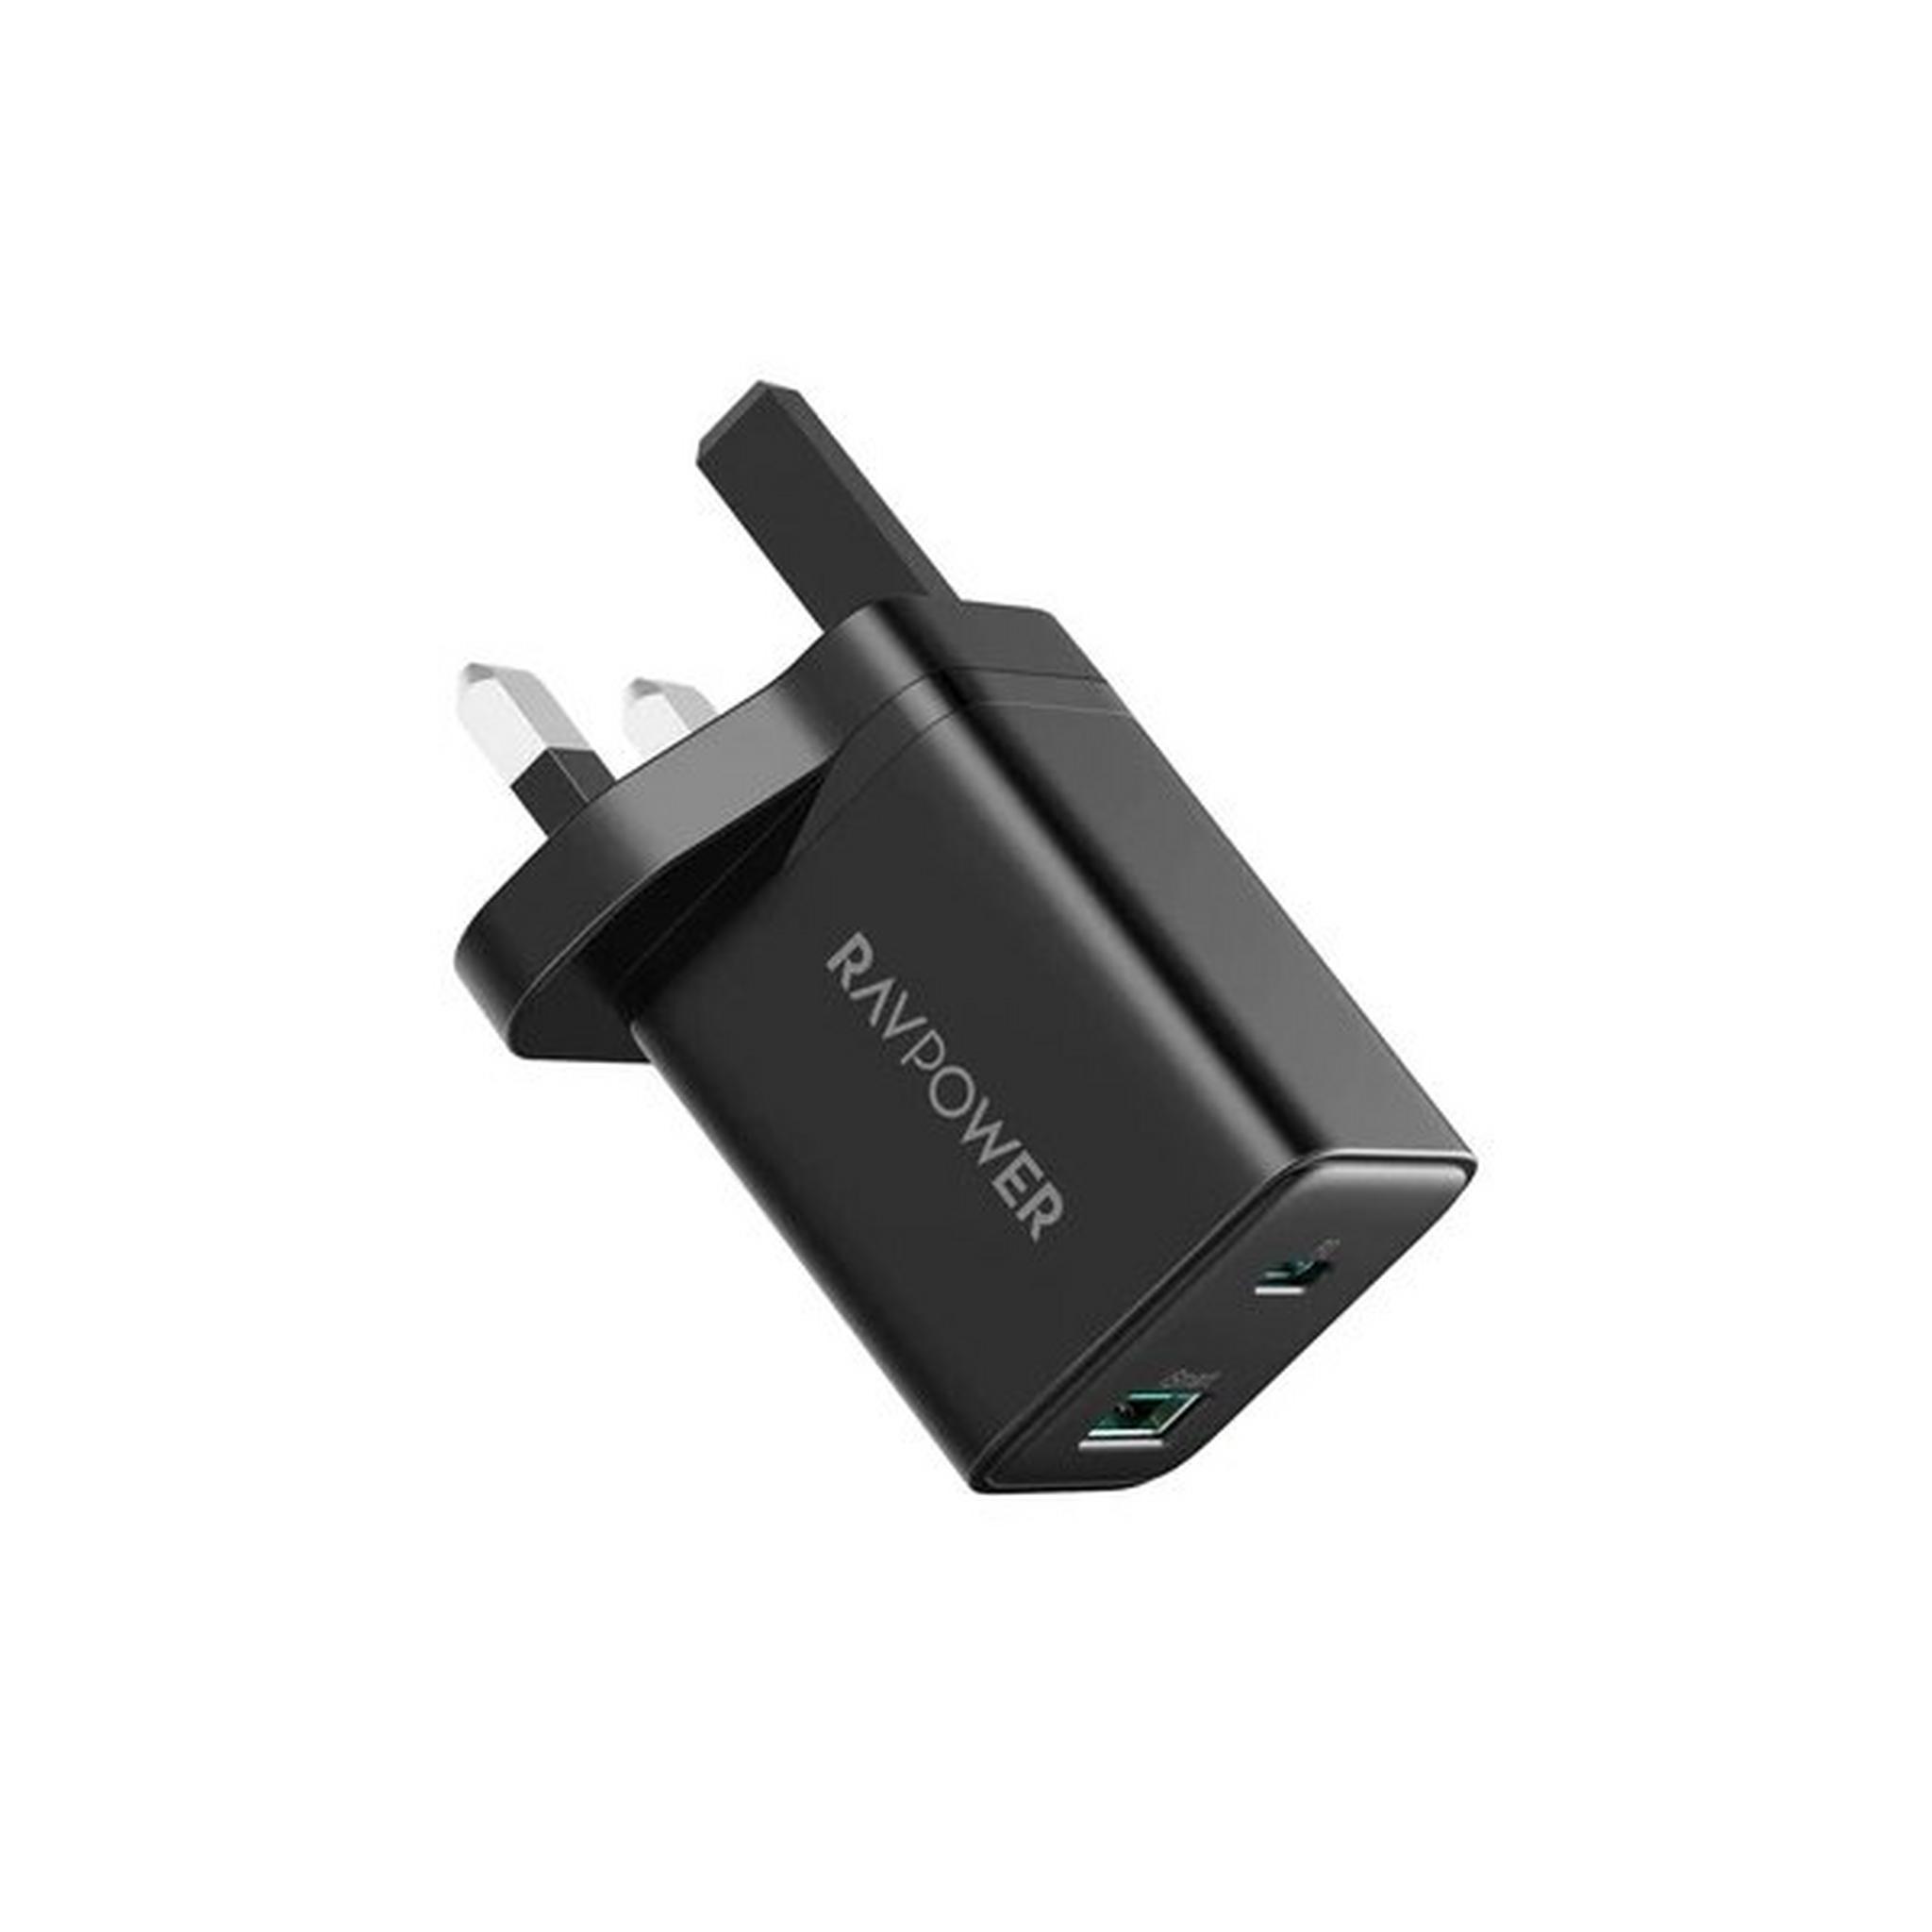 RAVPower Wall Charger, 2-Port, 20W, RP-PC168 - Black